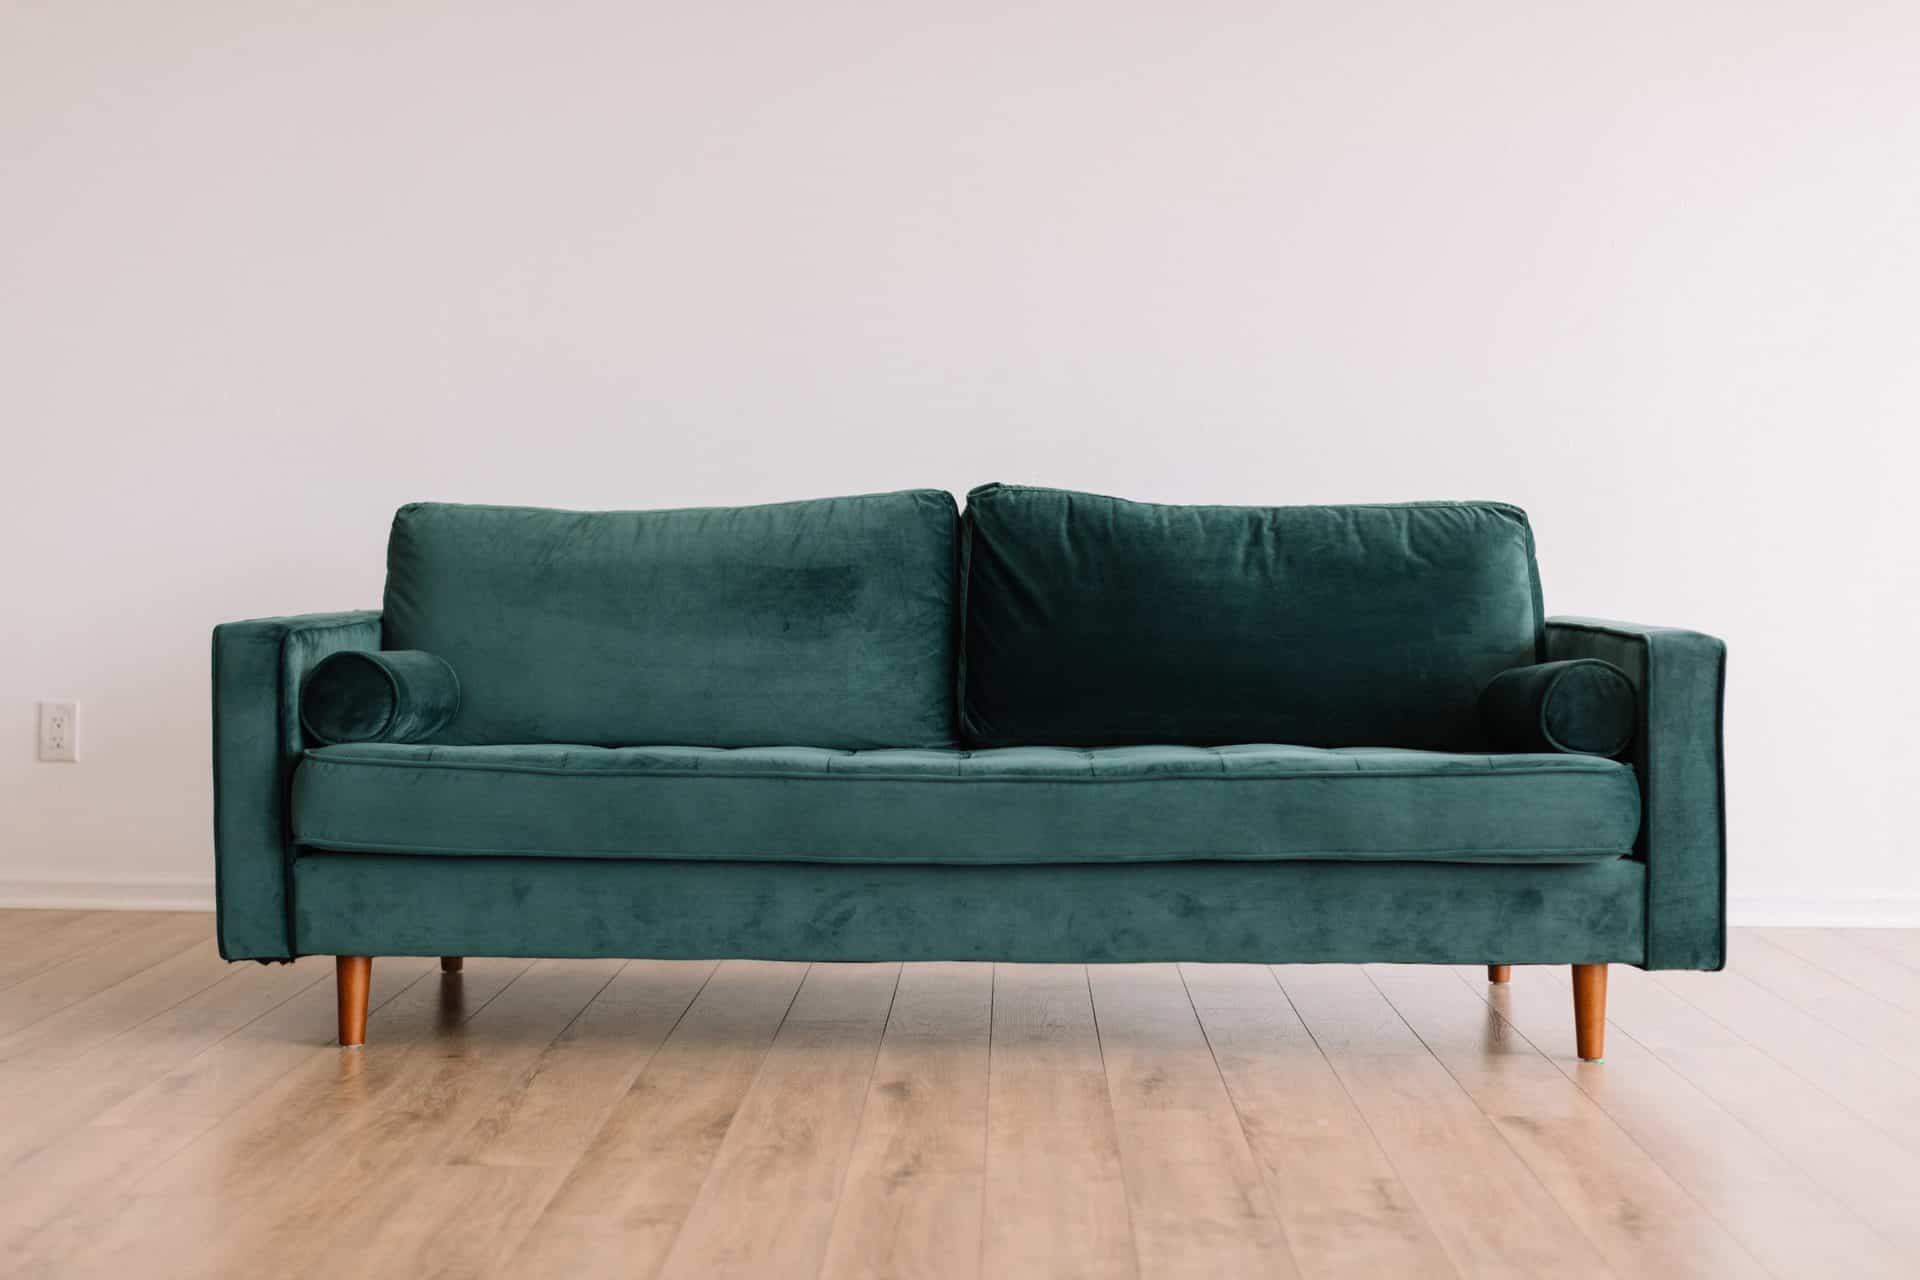 Featured image for “George Clarke reveals our sofa secrets”